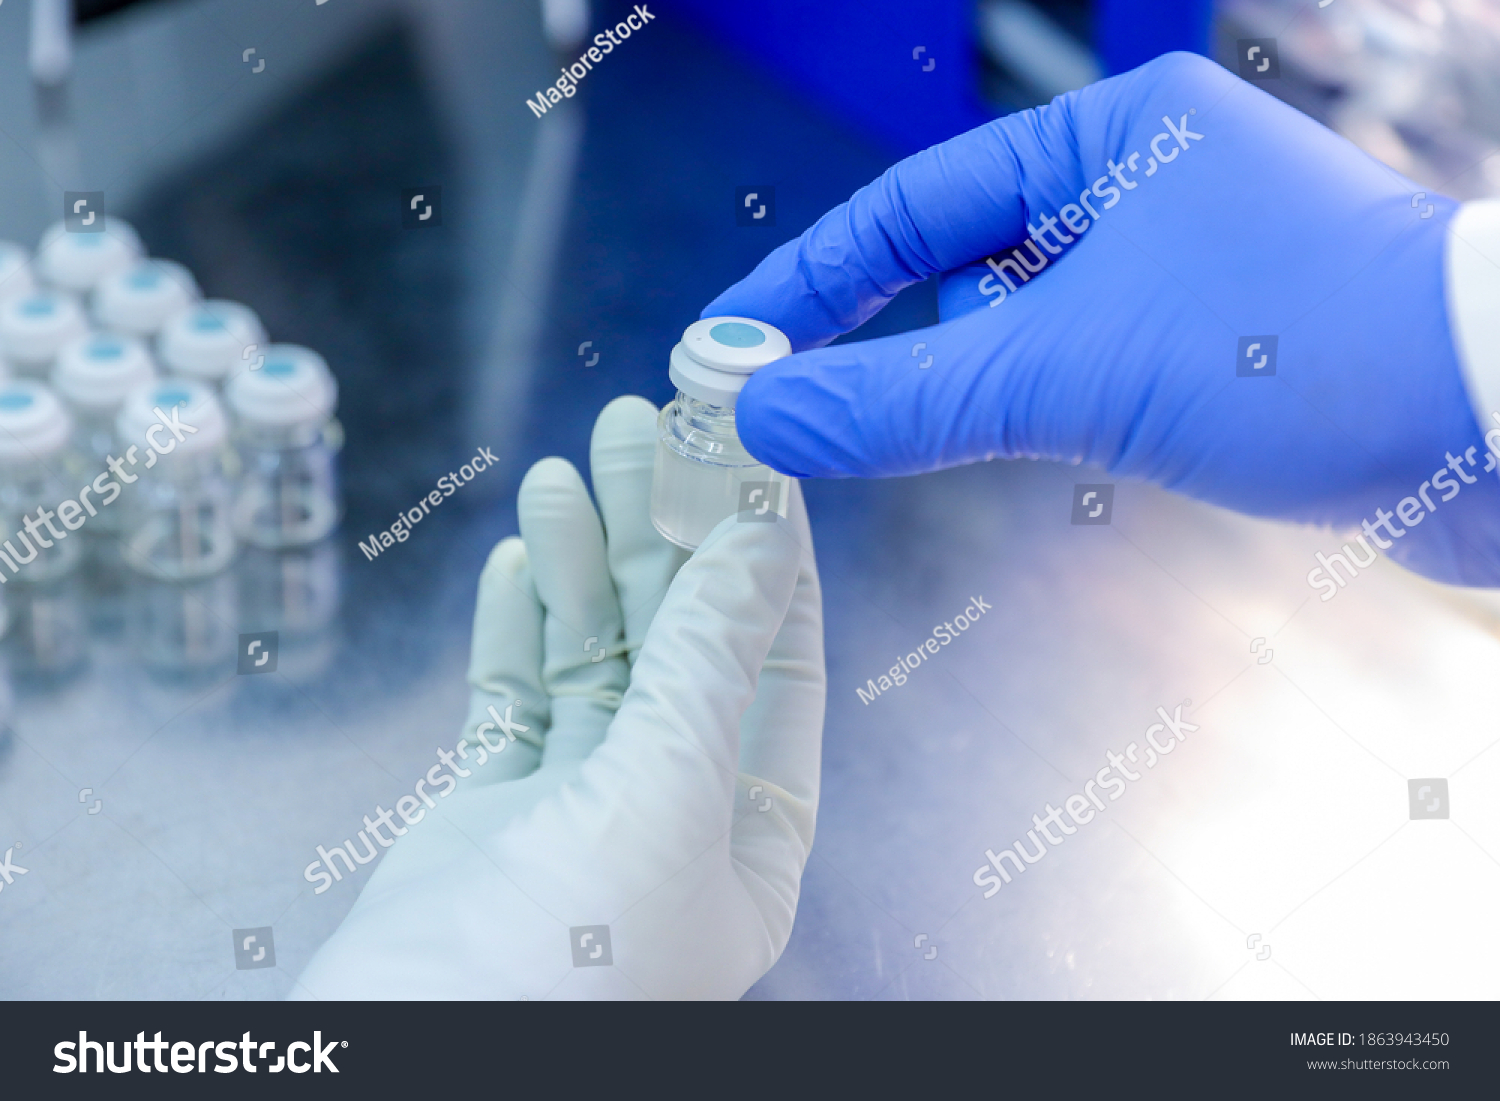 Hand with medical glove holding a bottle vaccine from ice storage. Medication treatment at nitrogen freeze. #1863943450